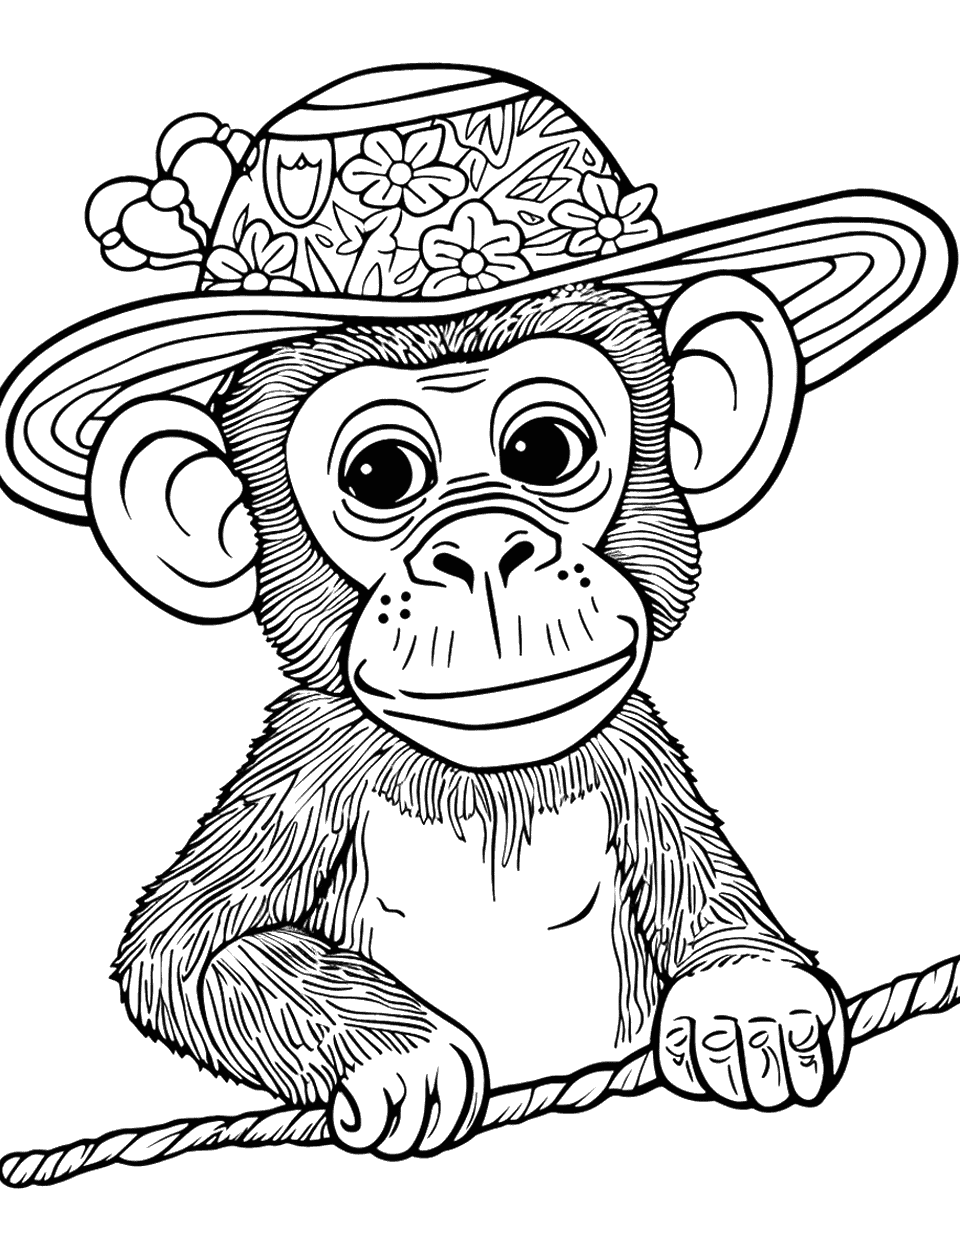 Monkey in a Hat Coloring Page - A whimsical scene of a monkey wearing an oversized hat.